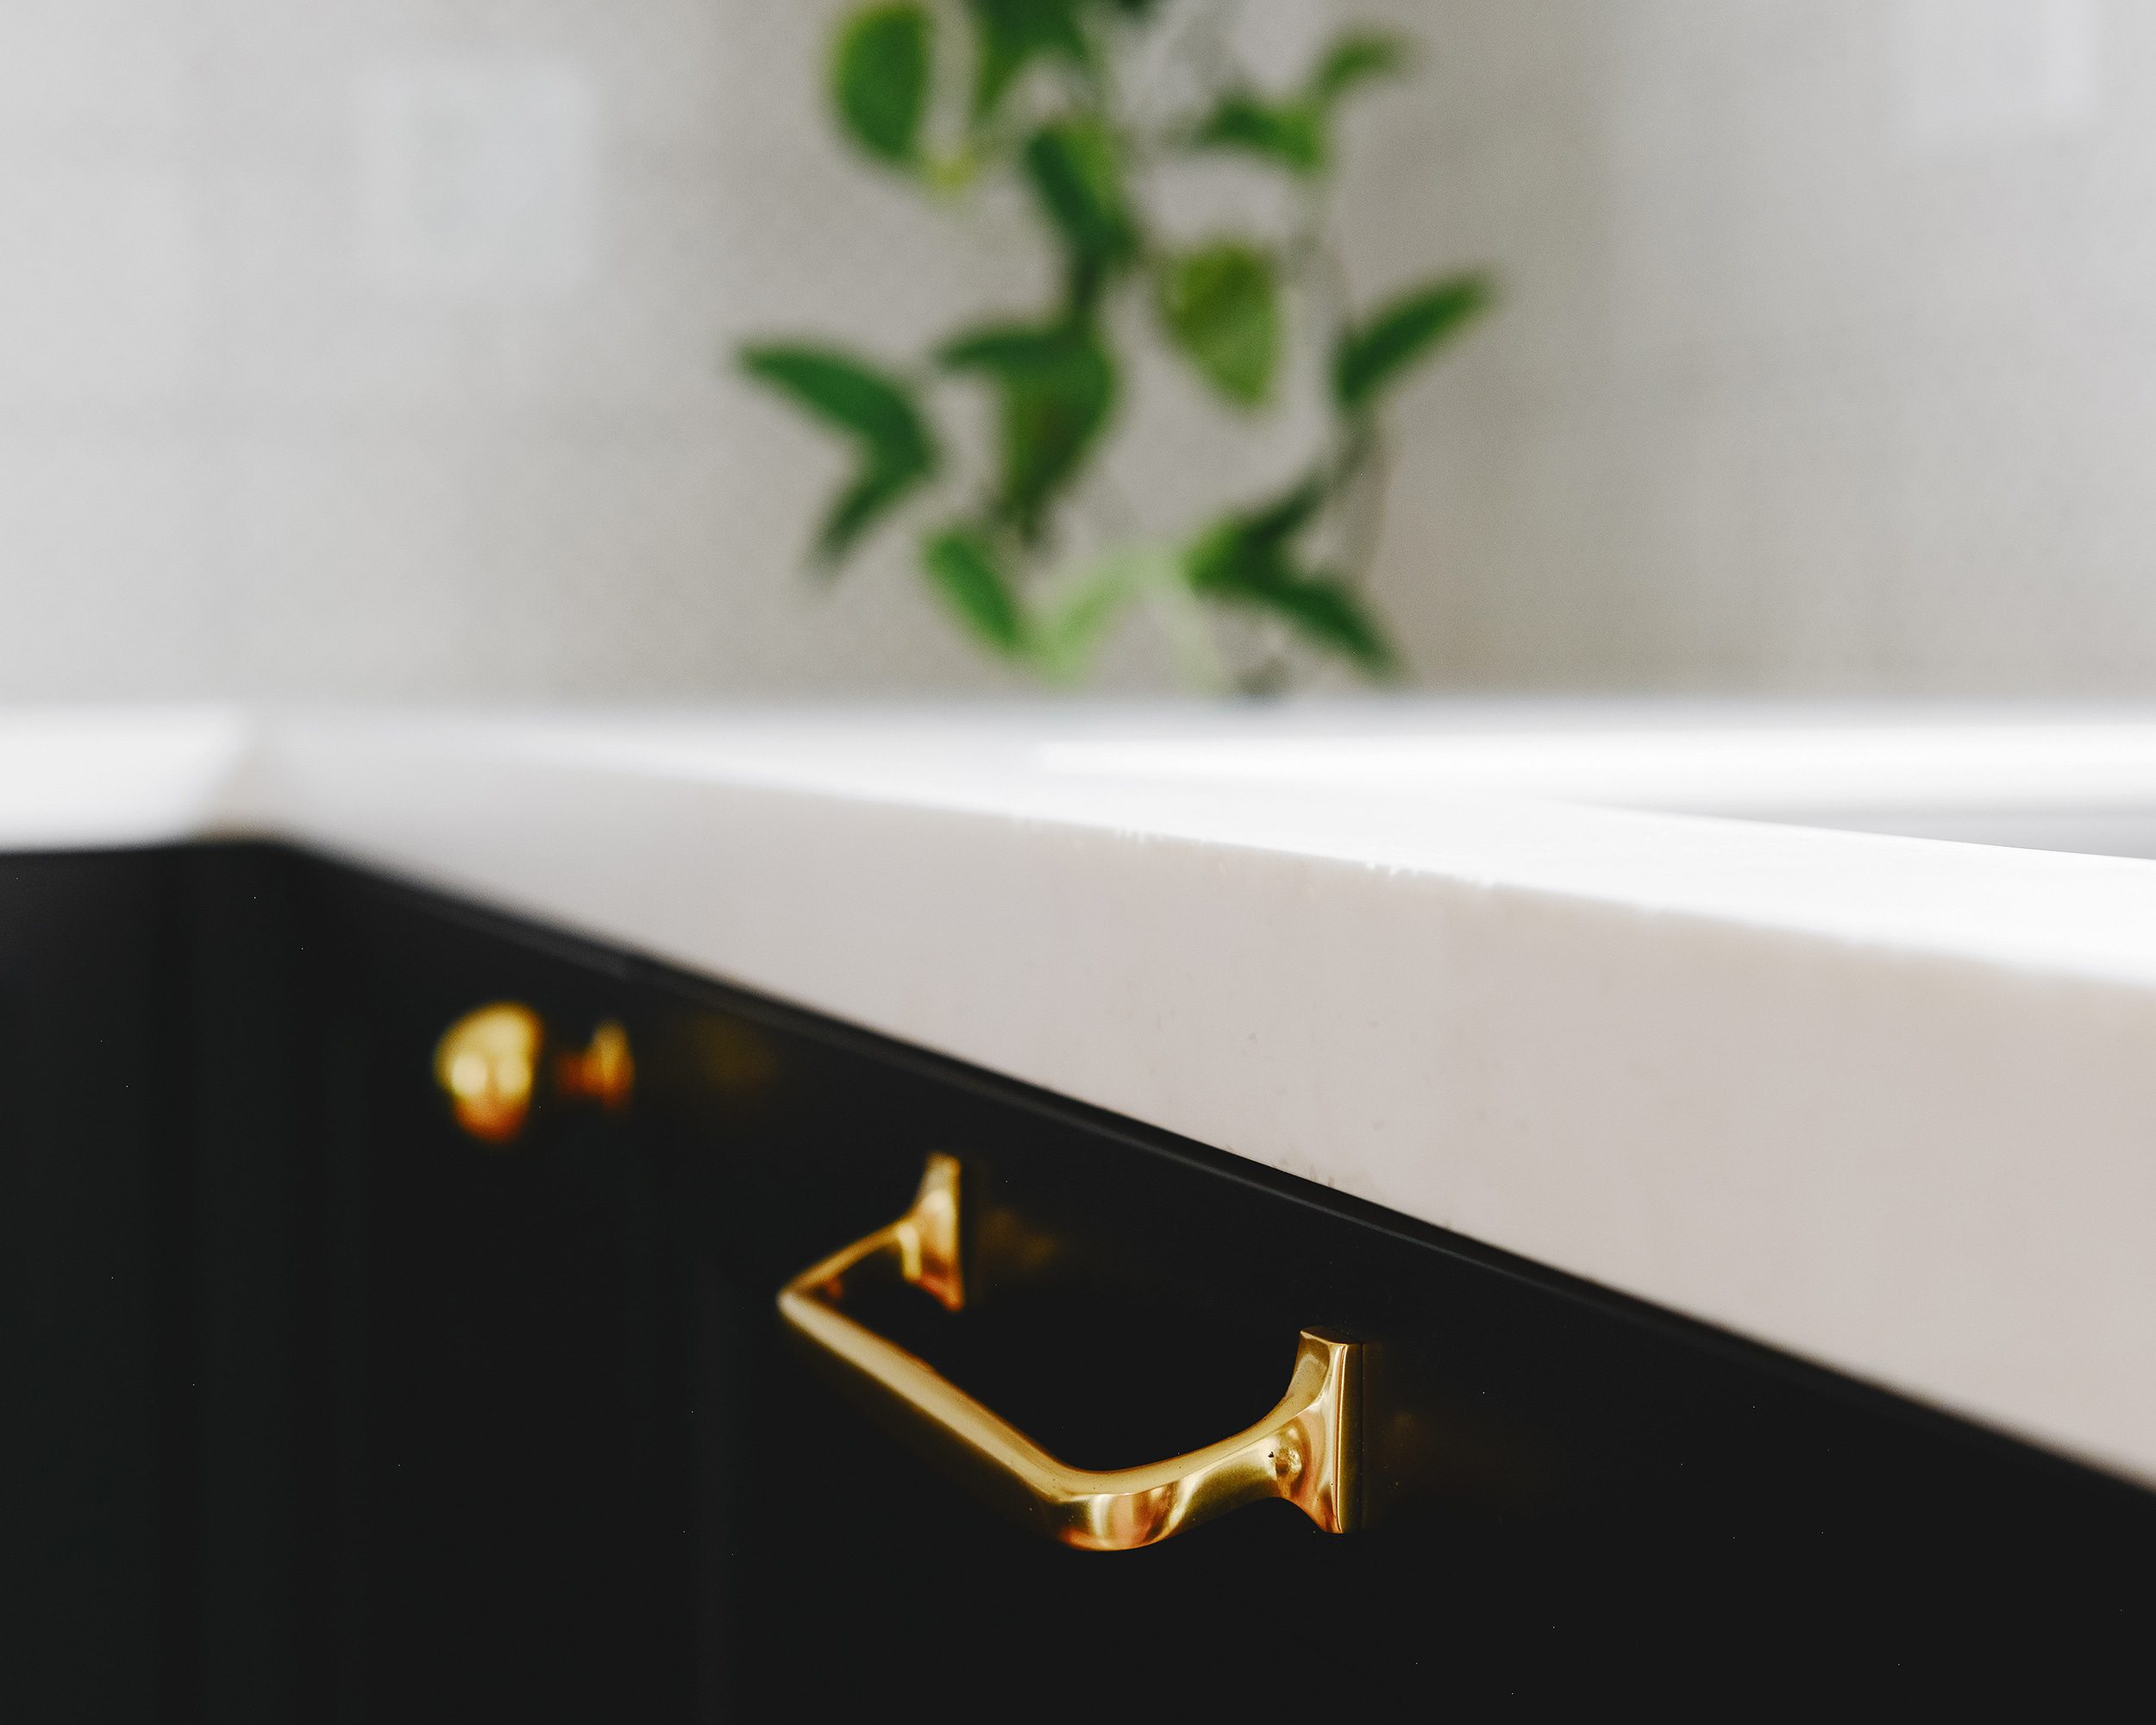 Close-up of Formica Bleached Concrete Everform countertops with brass pulls | via Yellow Brick Home